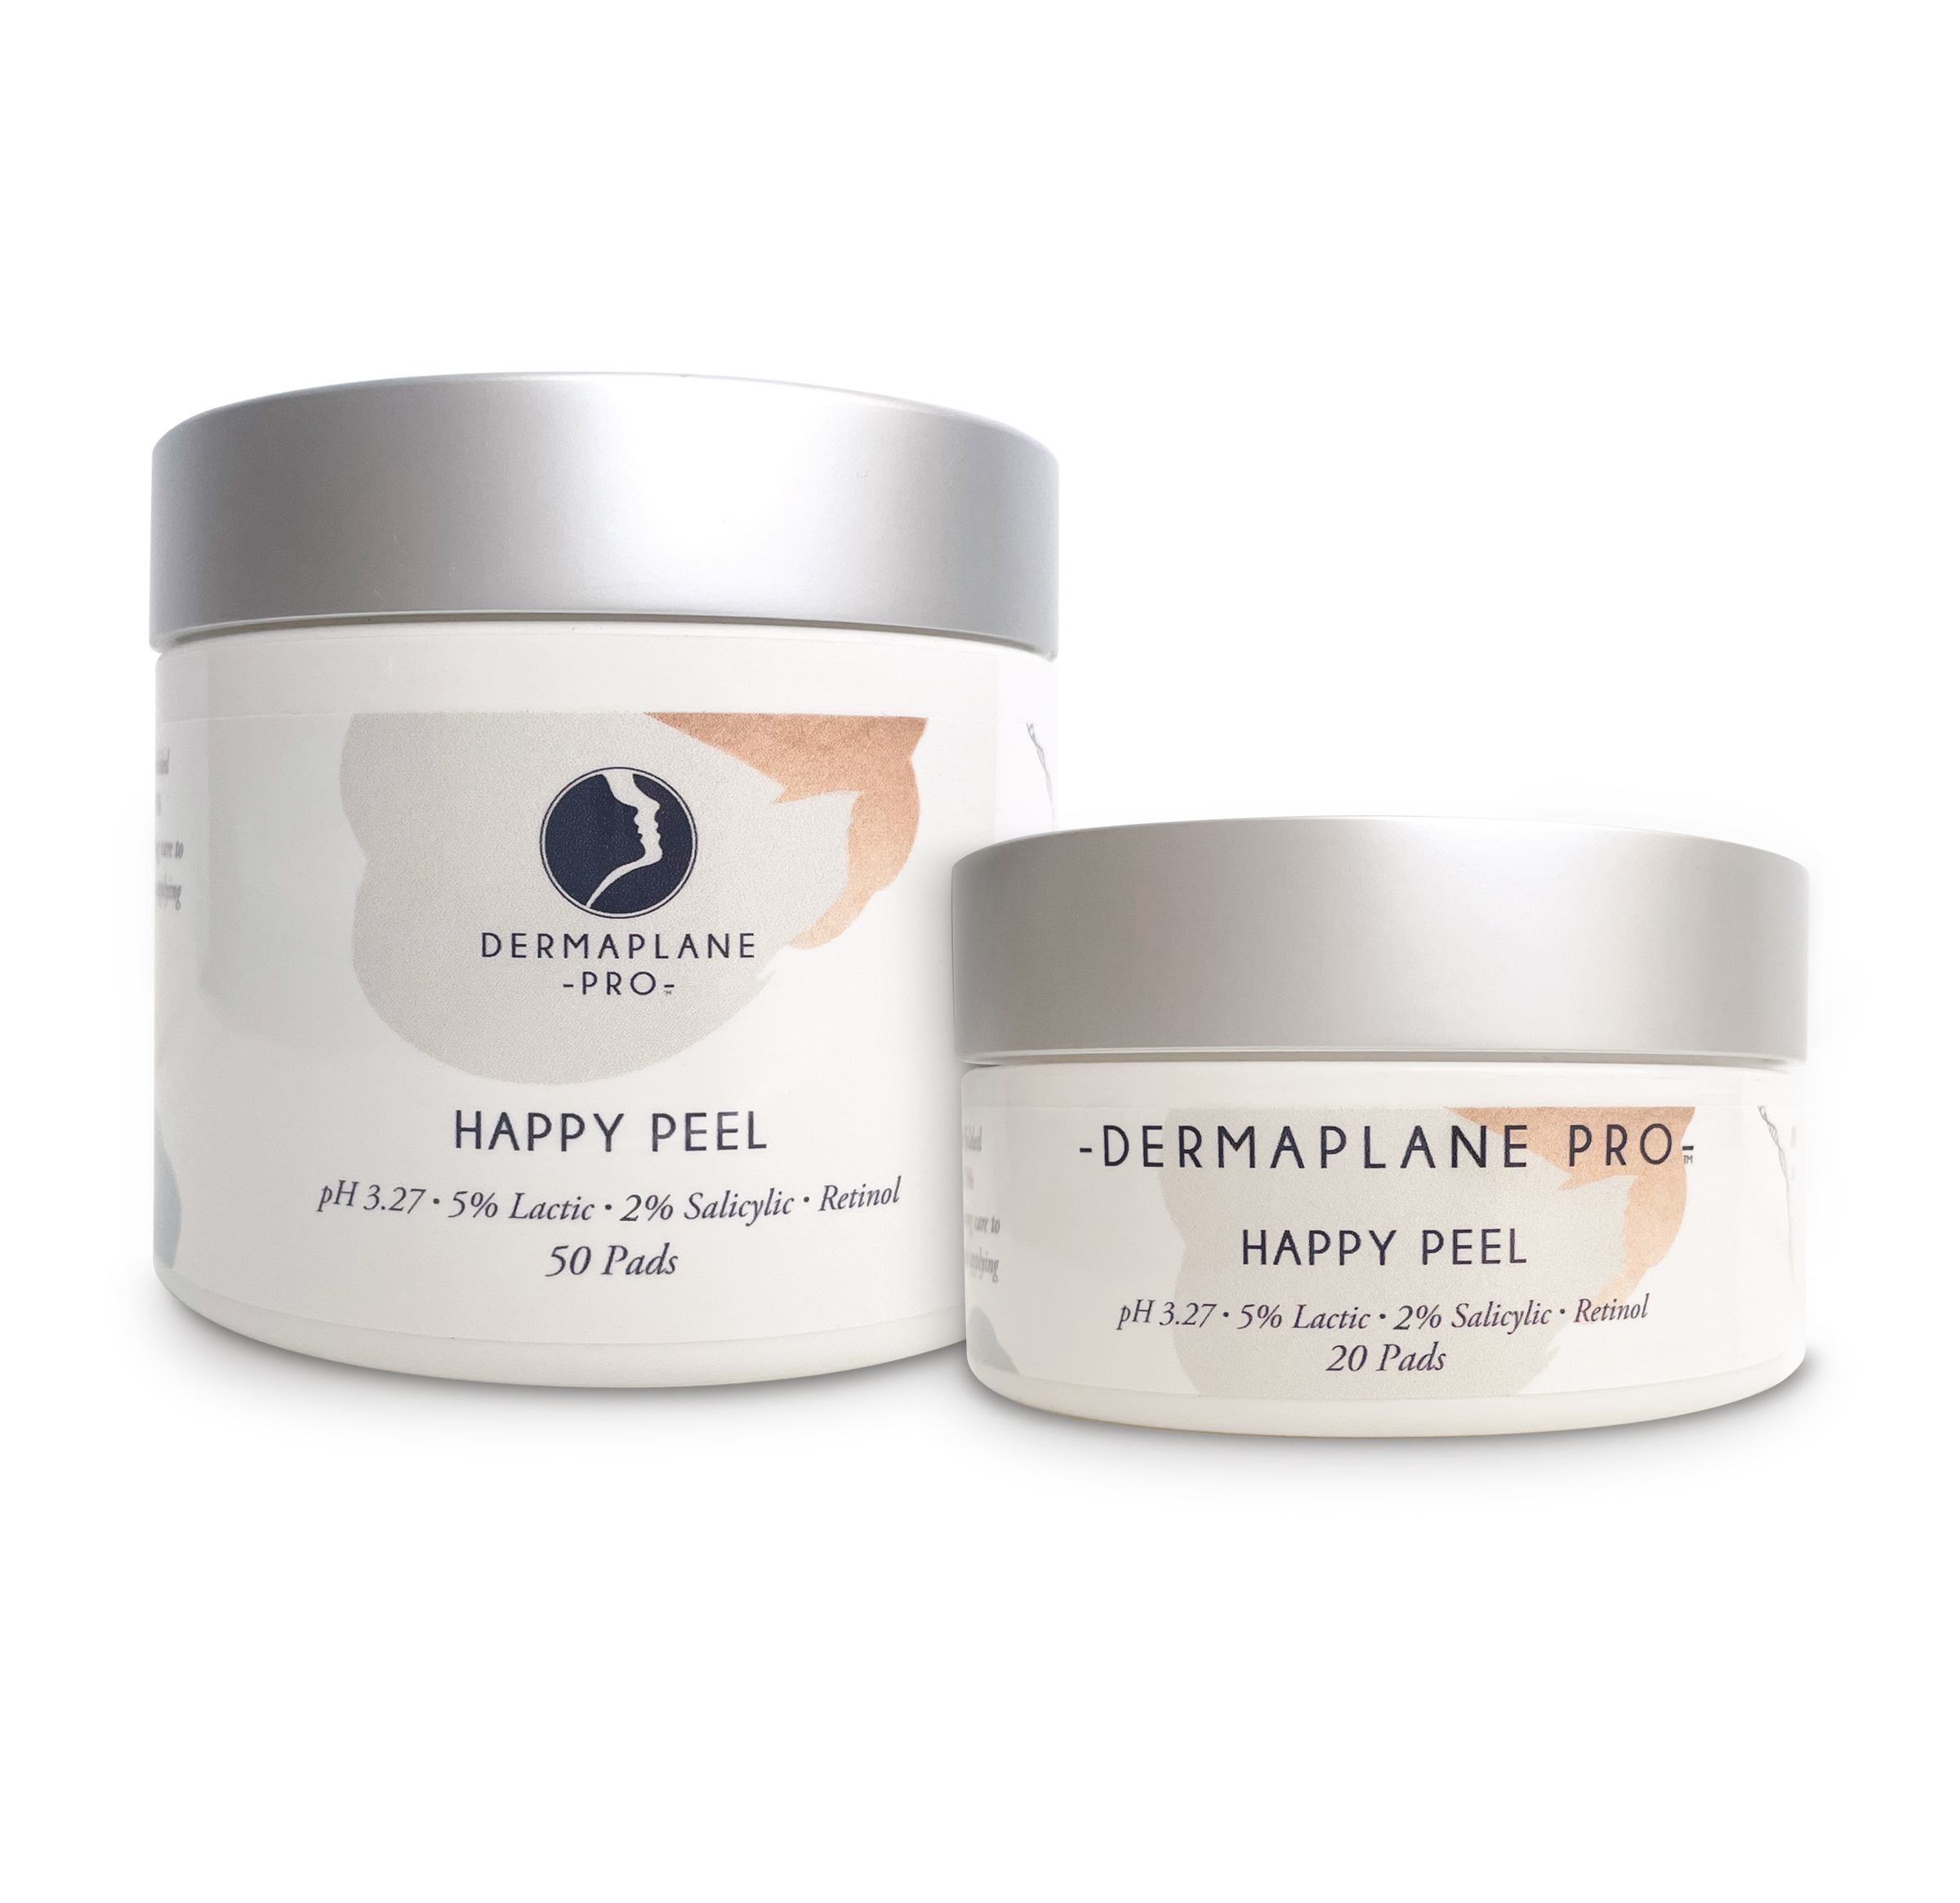 DermaplanePro Happy Peel dermaplaning peel pads in jars of 50 pads (4 oz) and 20 pads (2 oz). The perfect peel to use with dermaplaning. Jars on white background.